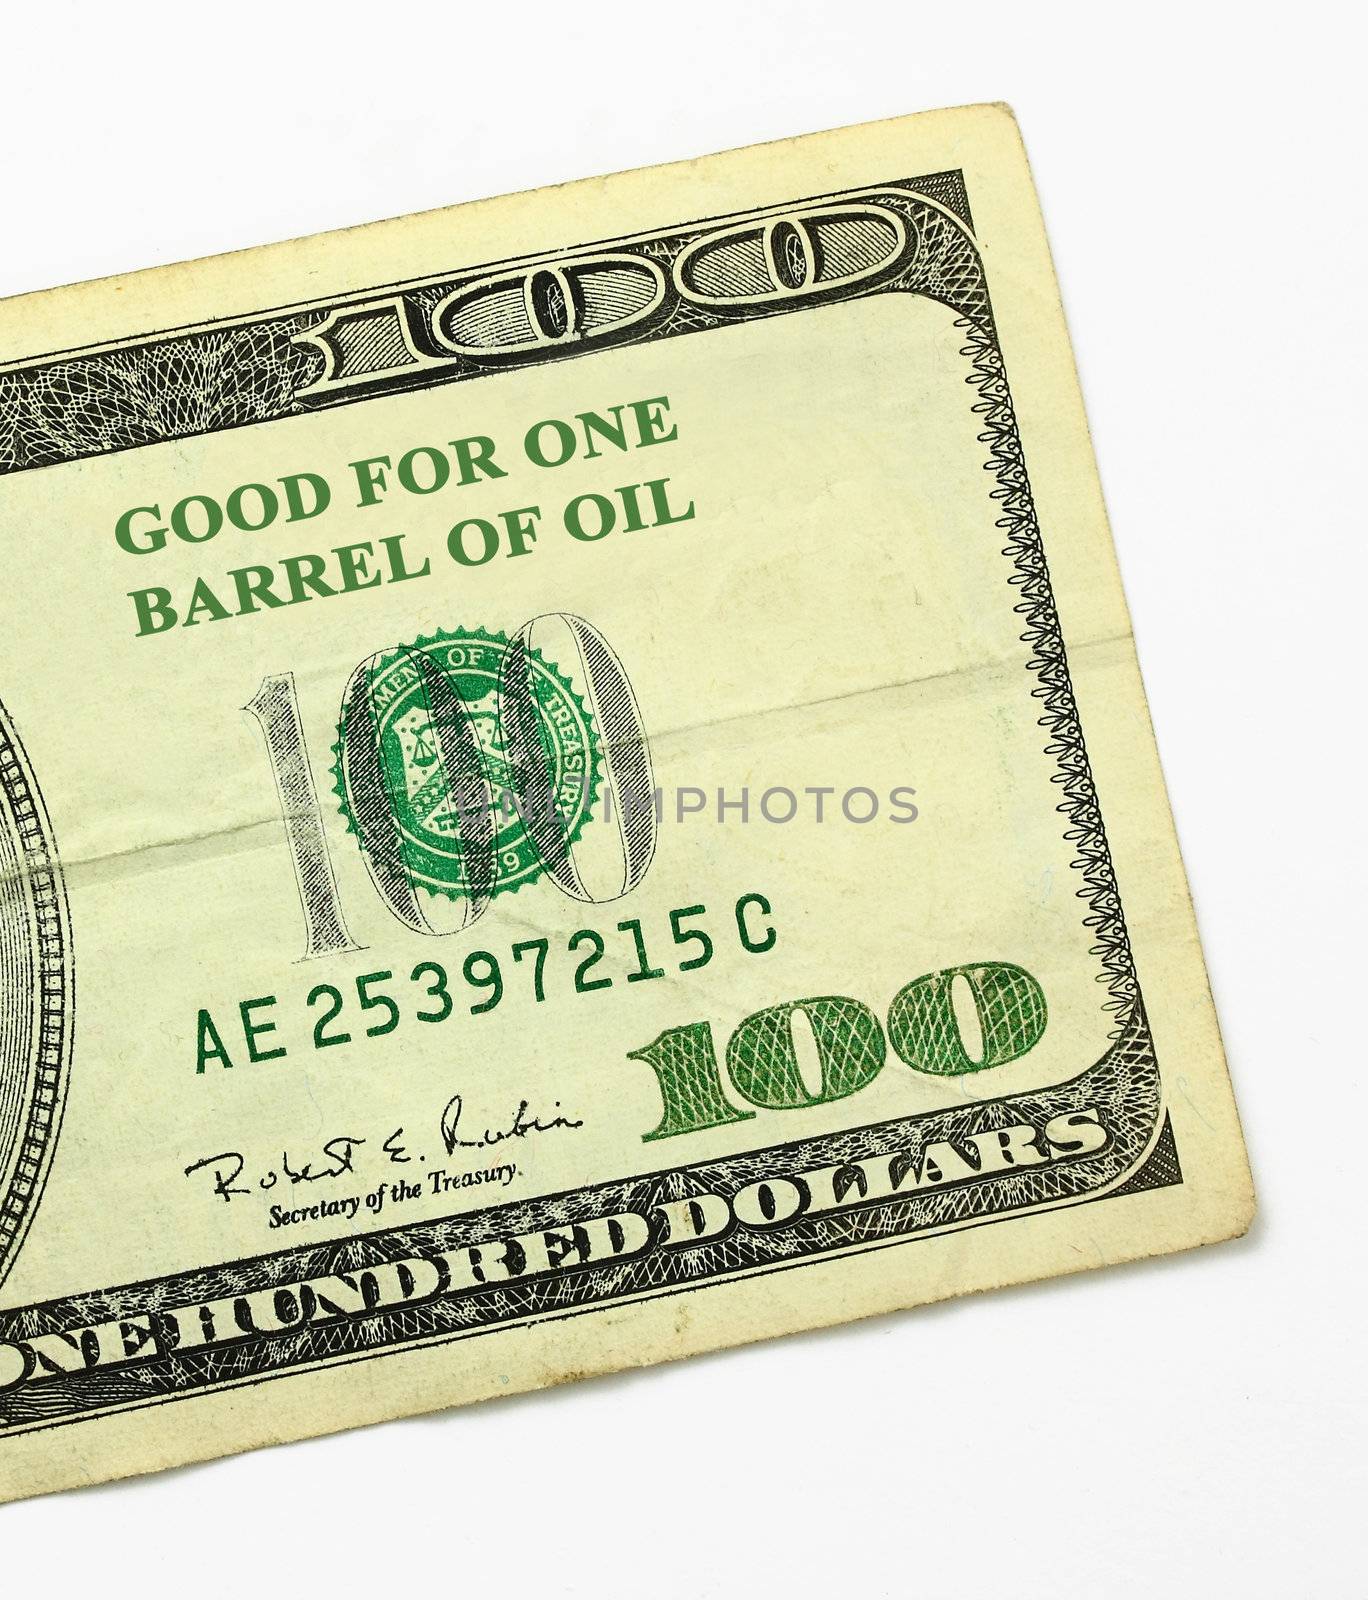 $100 bill and the price of oil.